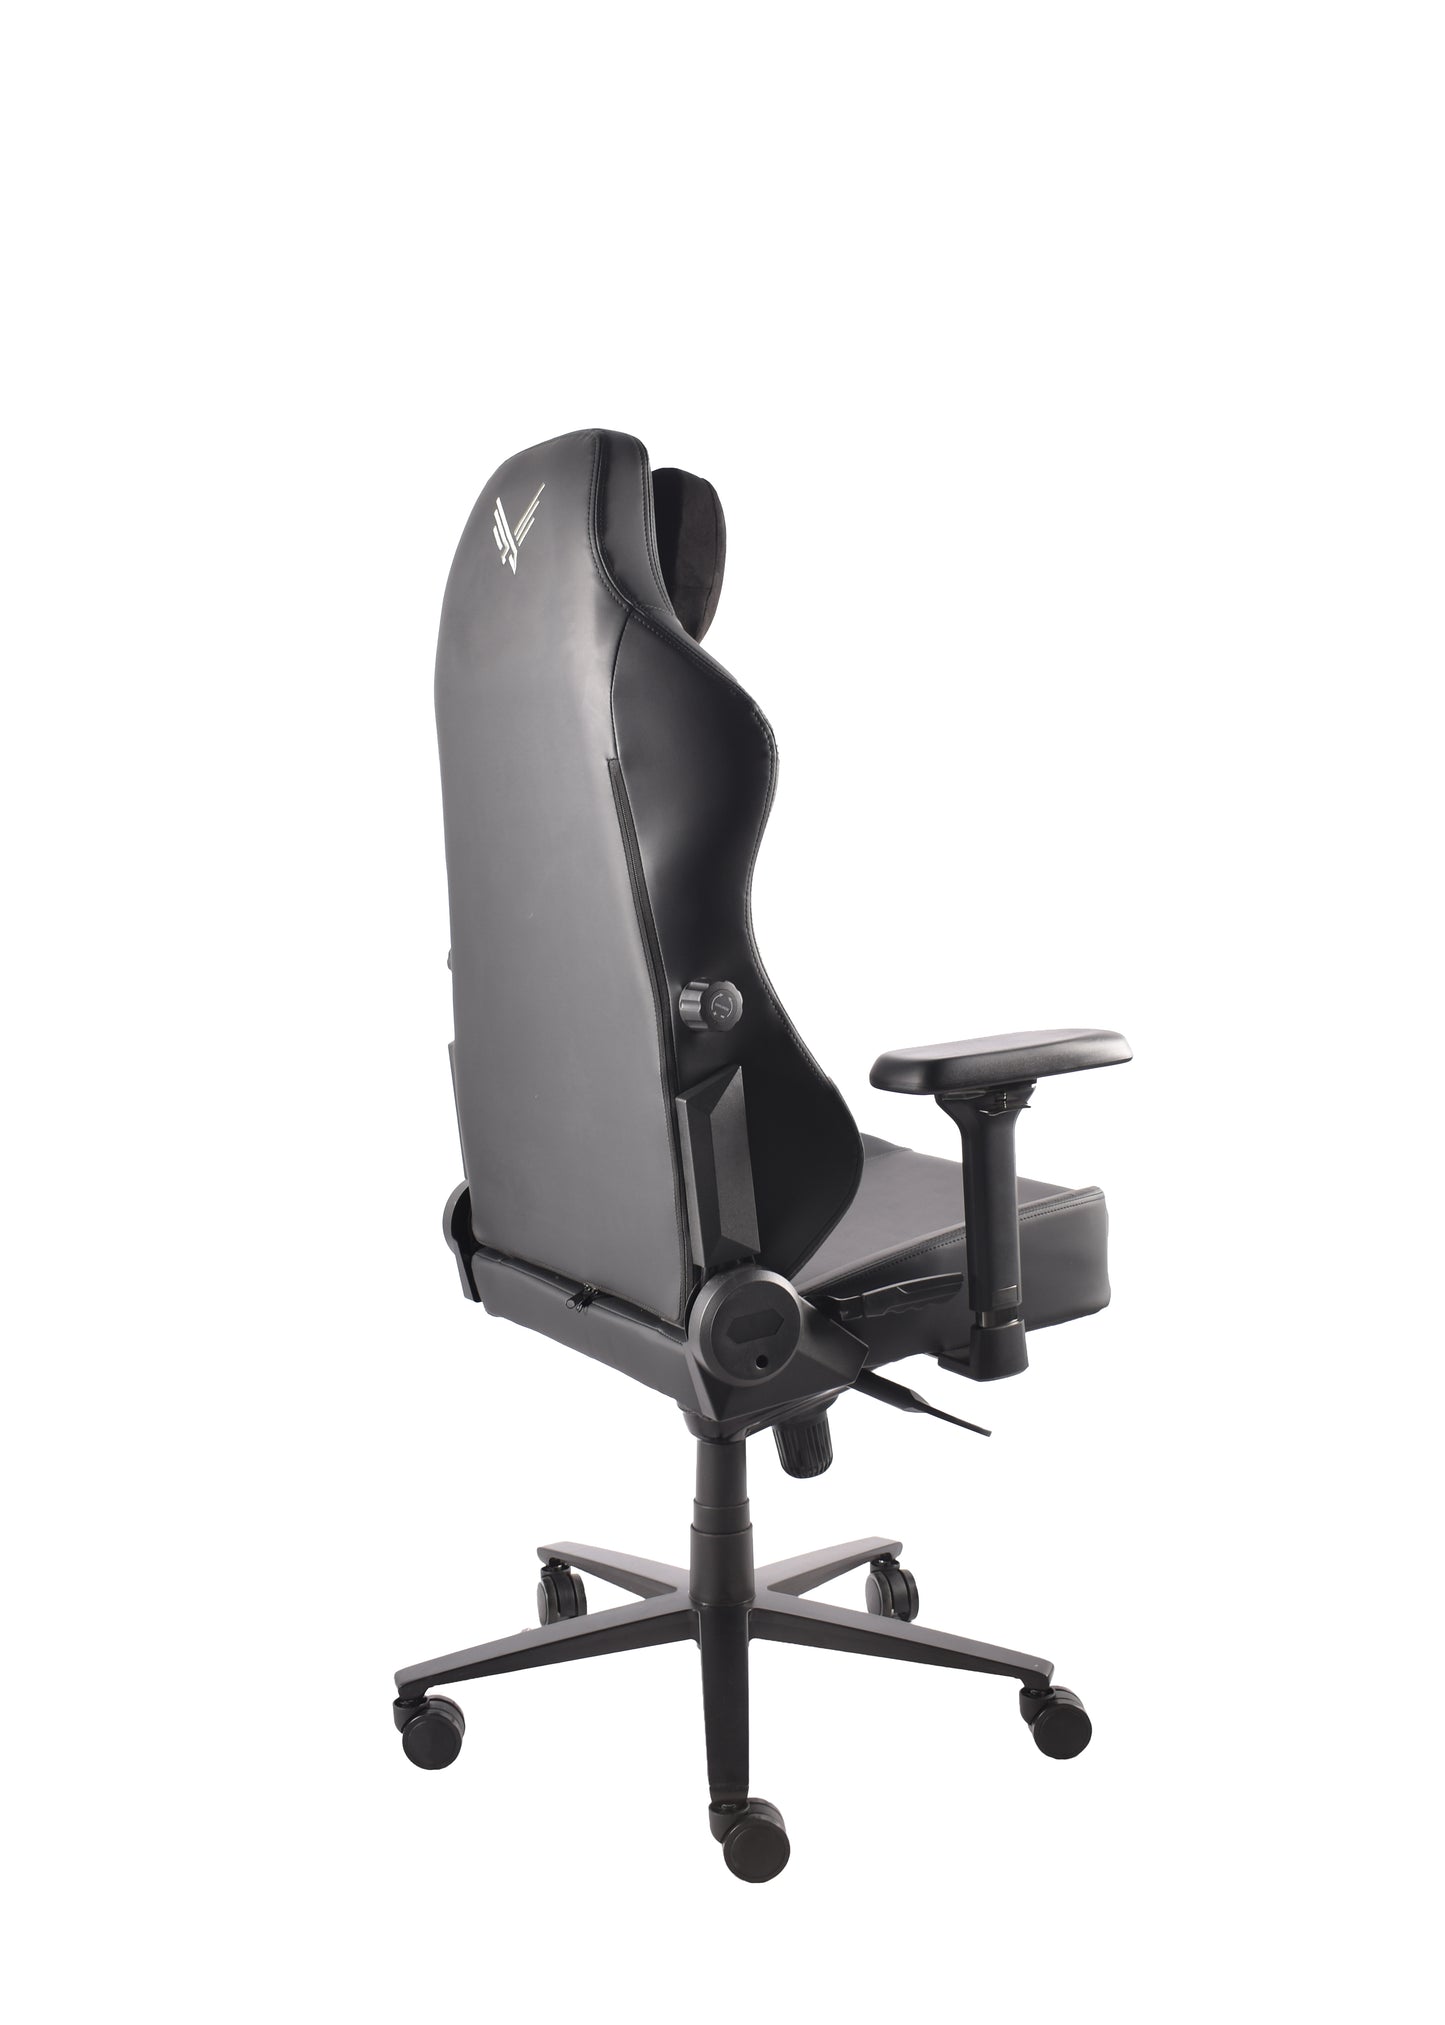 Victrack Premium Gaming Chair, Computer Chair, Height Adjustable, with 360°-Swivel Seat and for Office or Gaming, PGC-01, Black